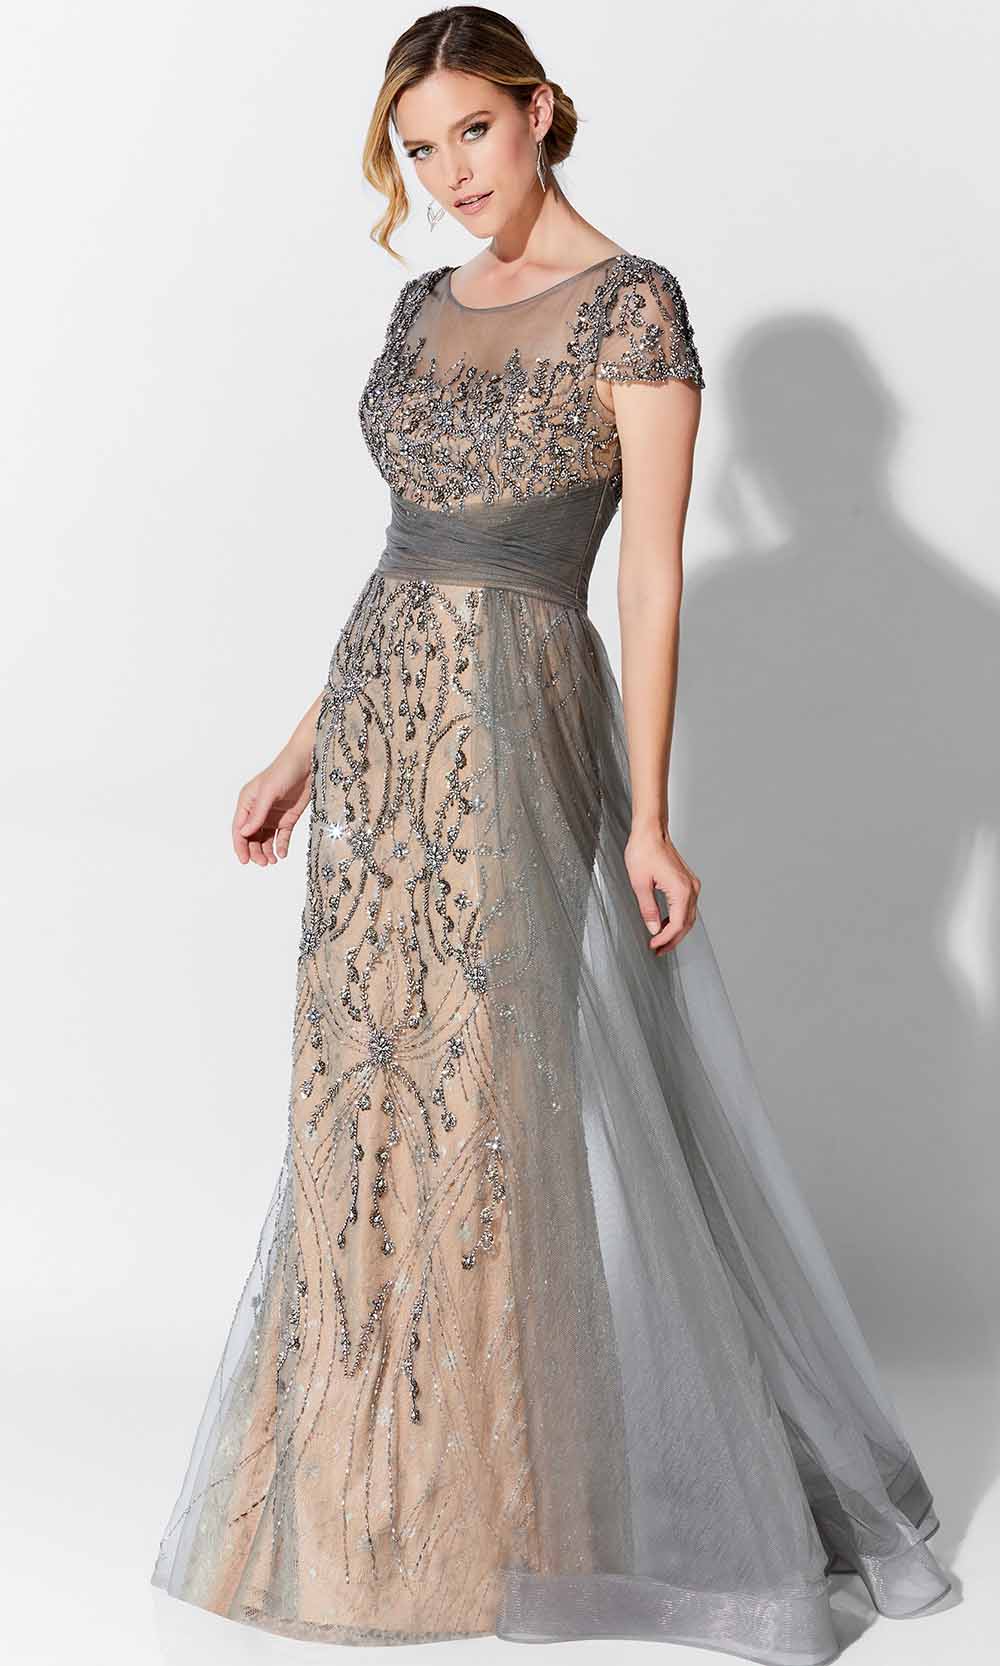 Image of Ivonne D 122D62 - Beaded Tulle Sheath Mother of the Bride Gown